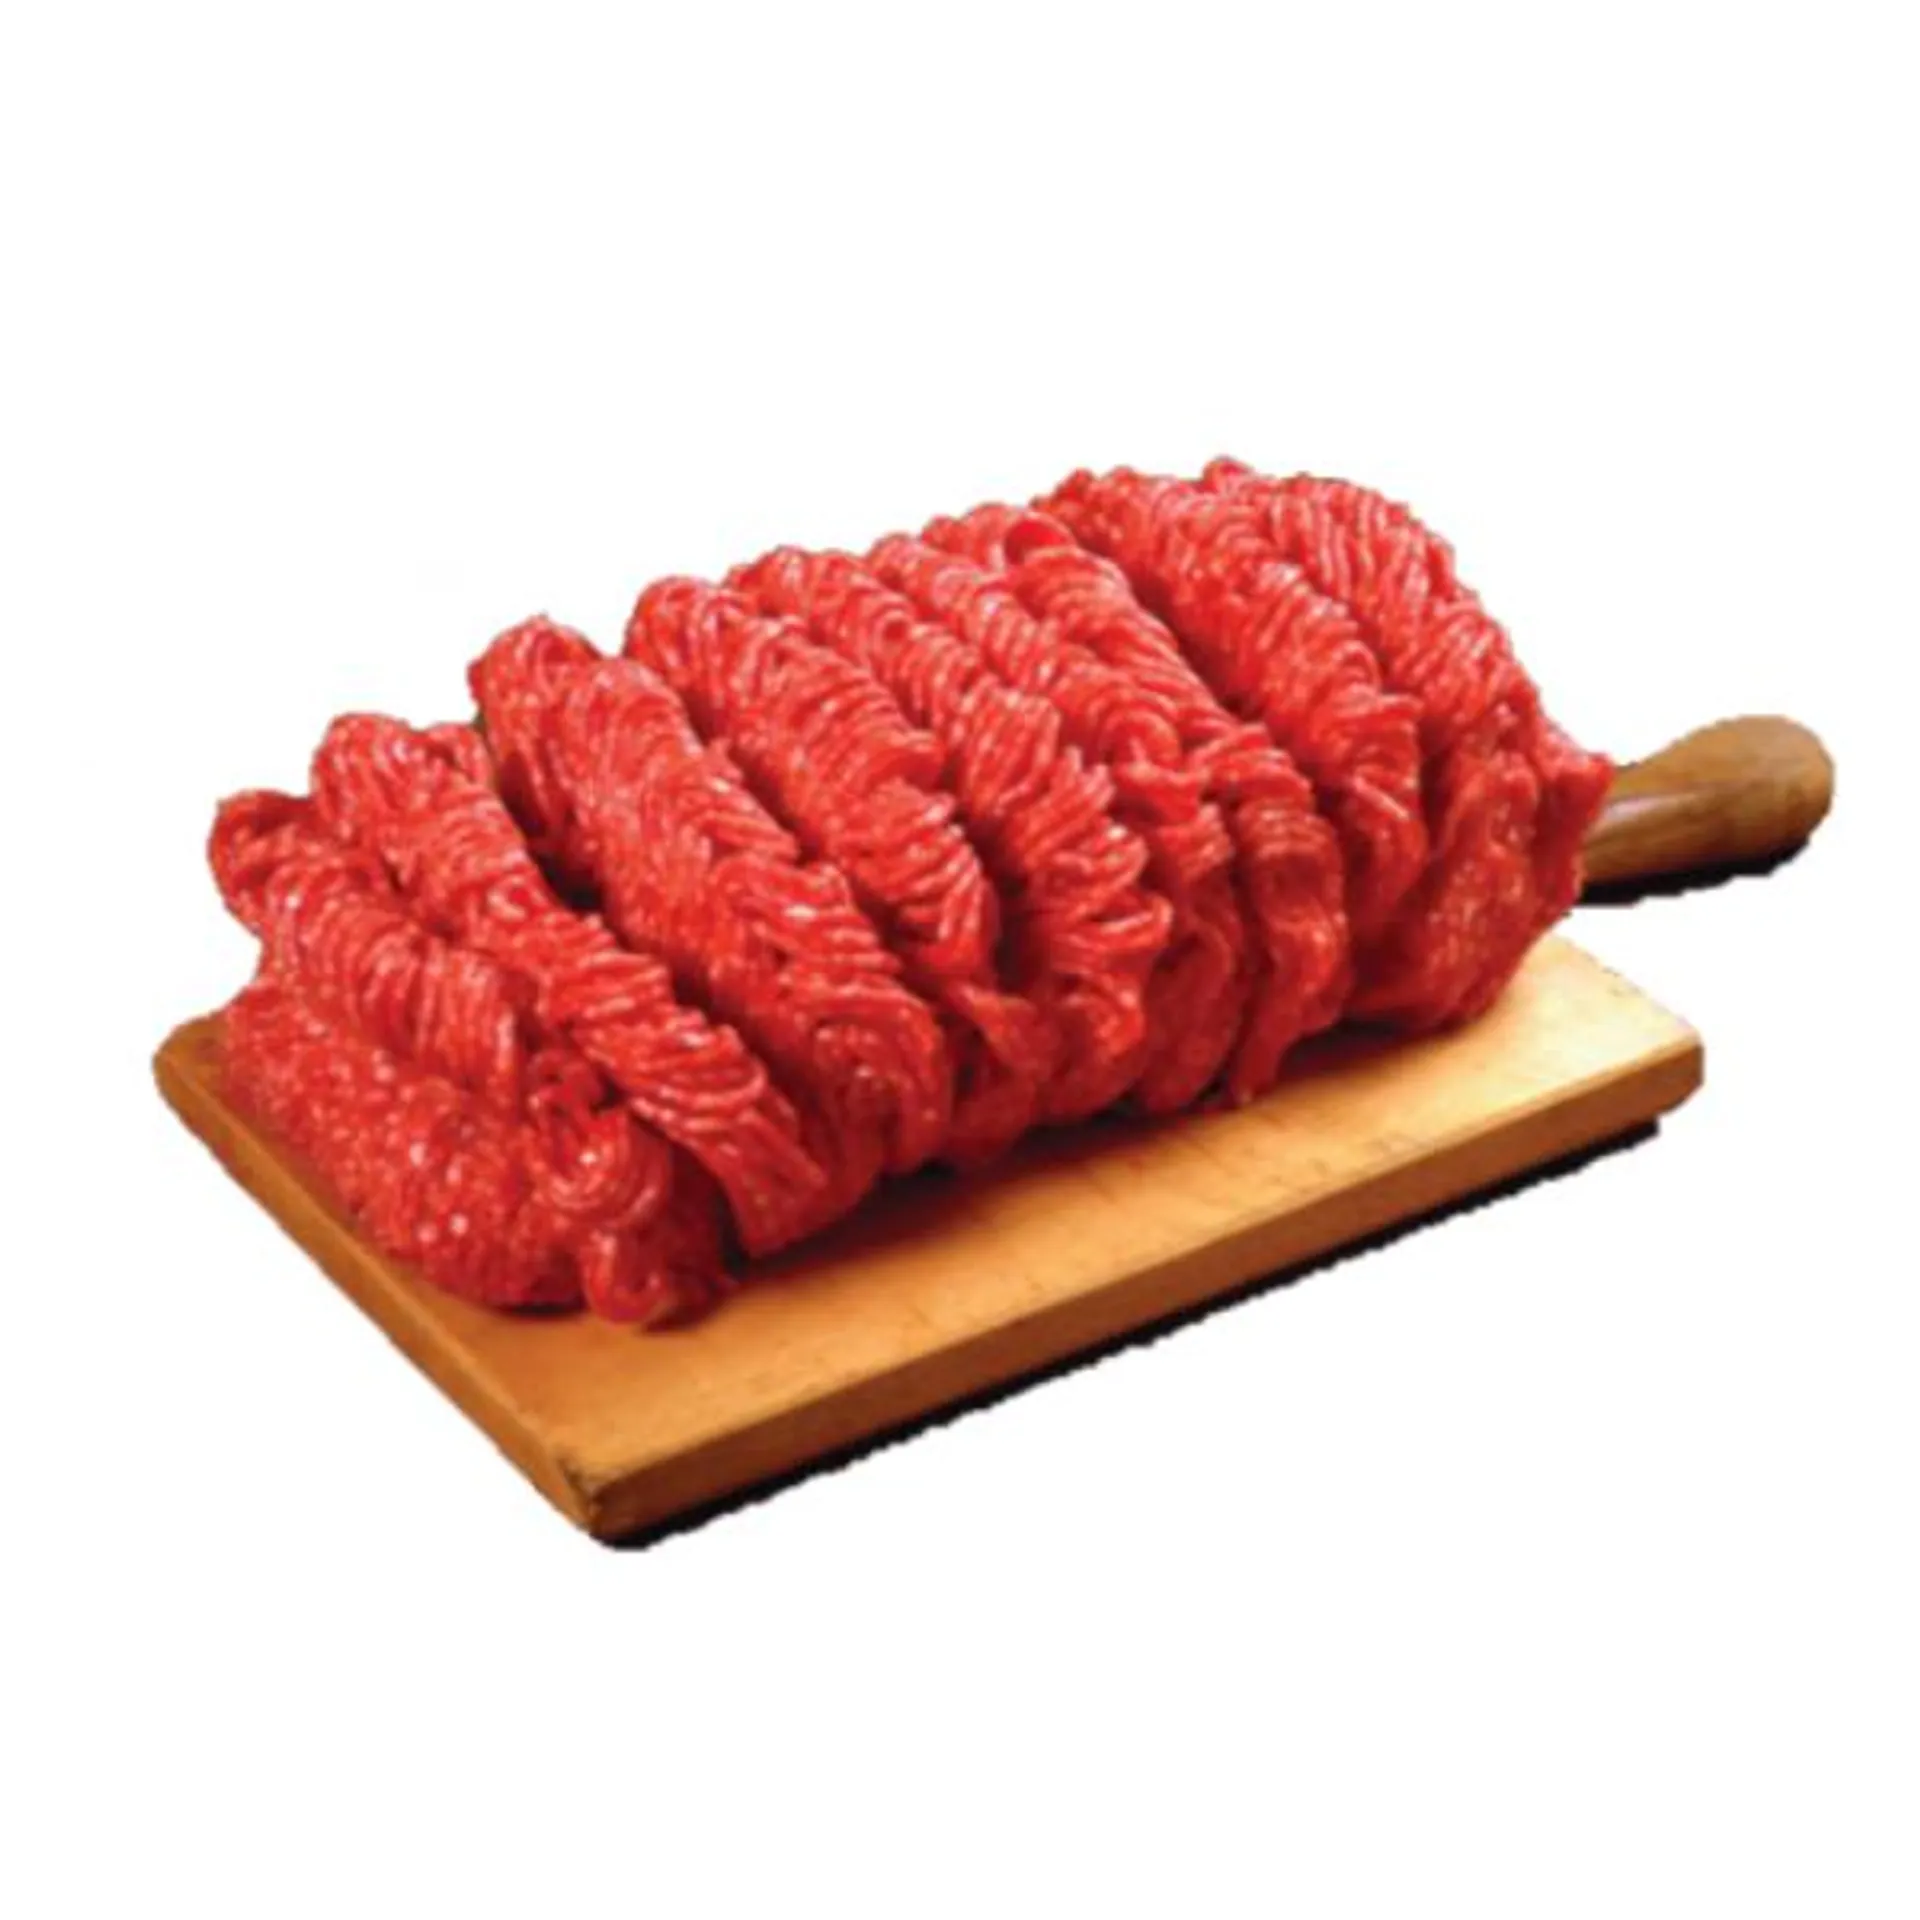 80% Grass Fed Ground Beef Value Pack - 3 Pound